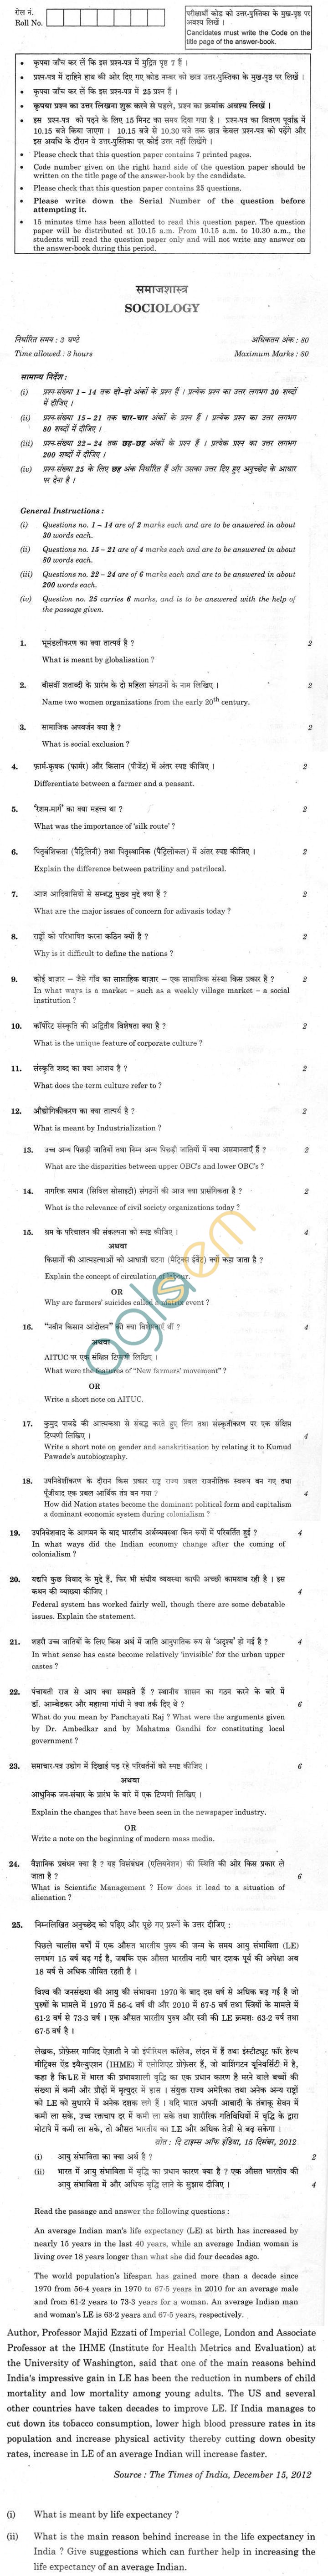 CBSE Compartment Exam 2013 Class XII Question Paper - Sociology